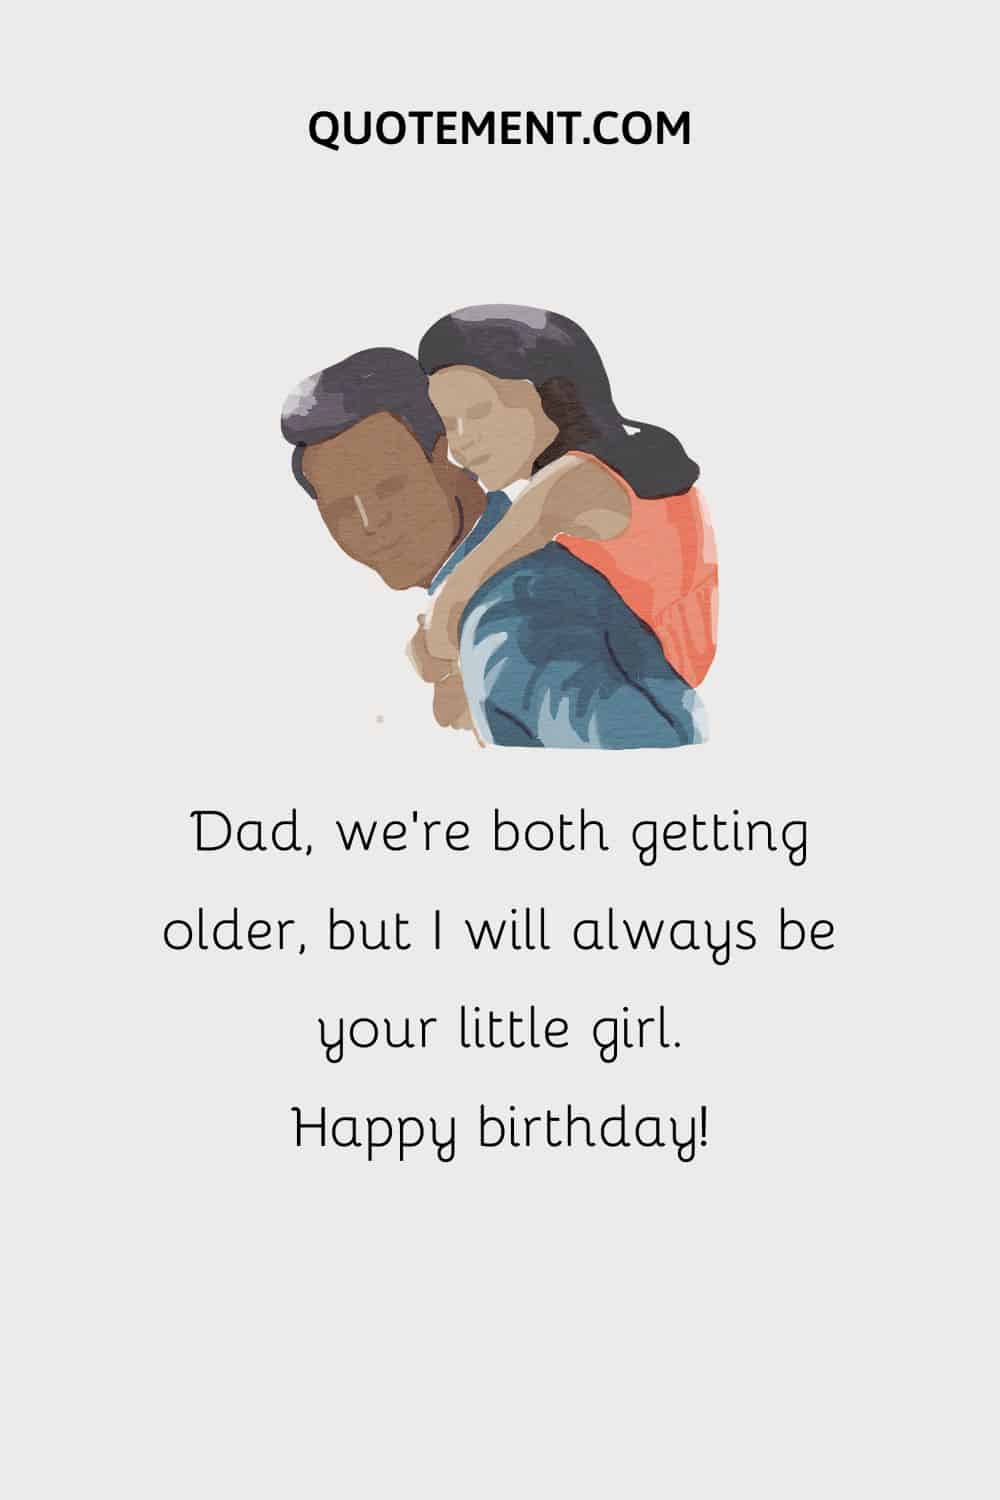 Dad, we’re both getting older, but I will always be your little girl